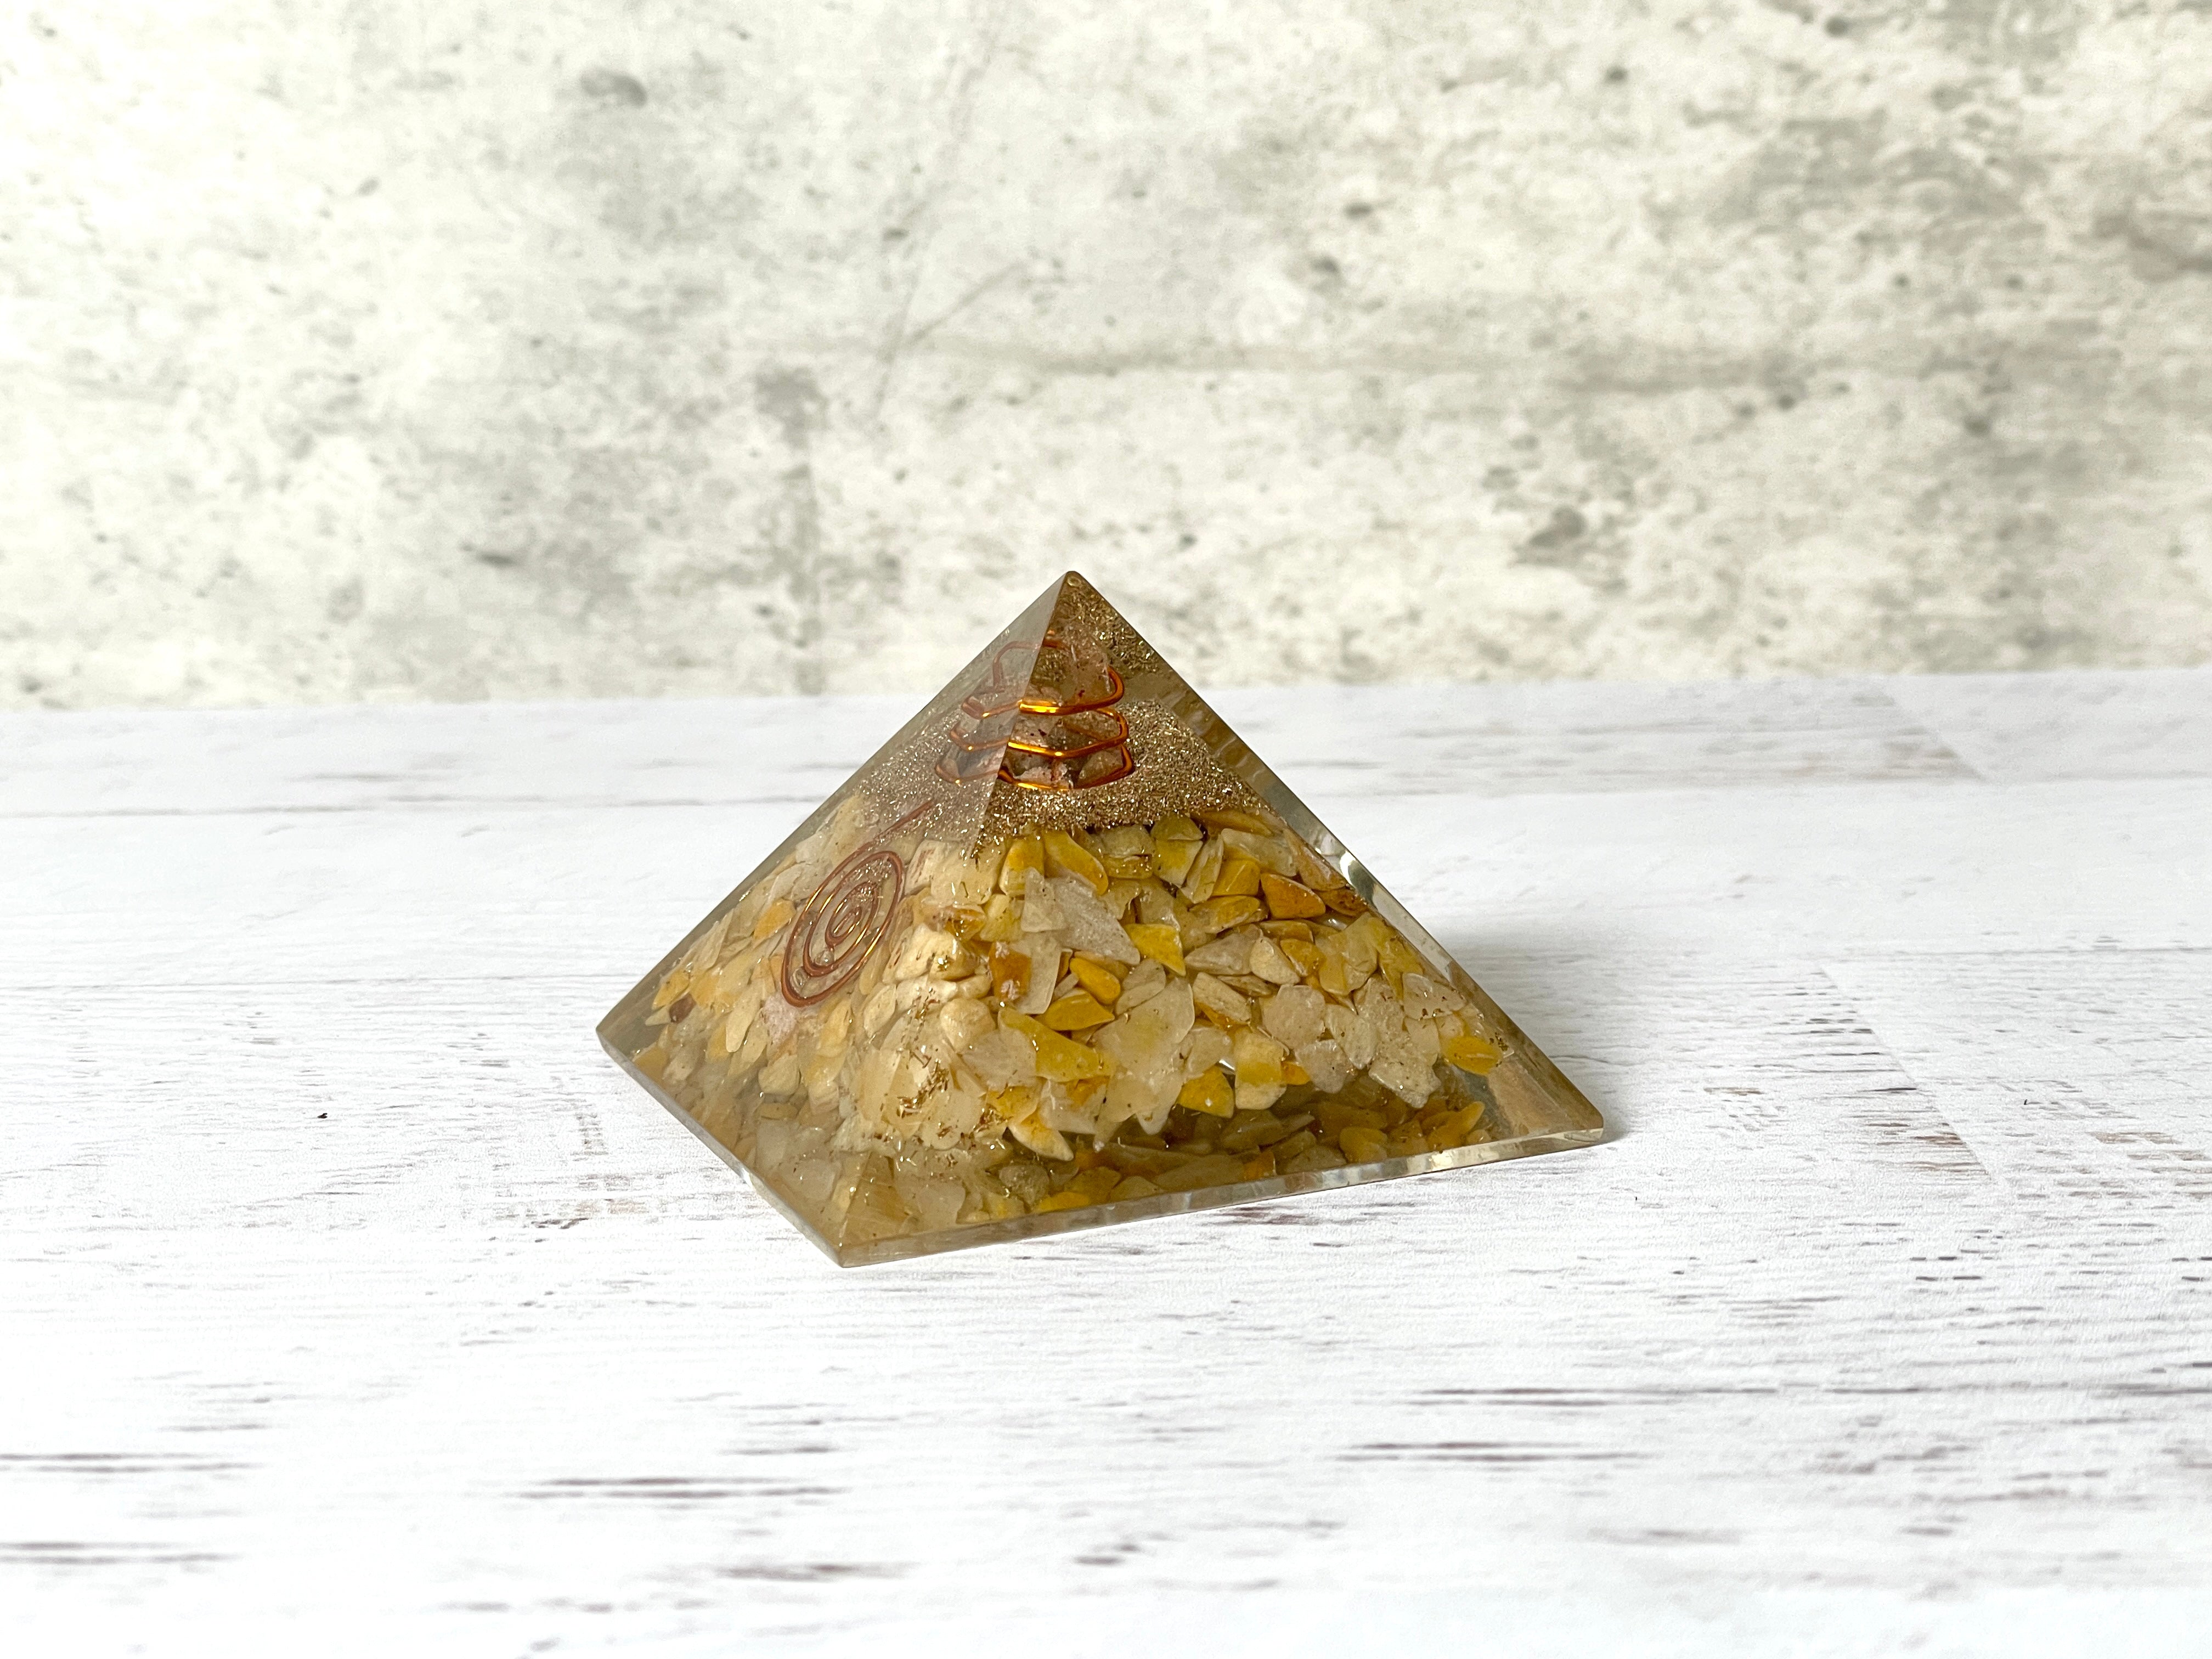 Buy Online Latest and Unique Orgonite Yellow Aventurine Pyramid | Shop Best Spiritual Items - The Mystical Ritual